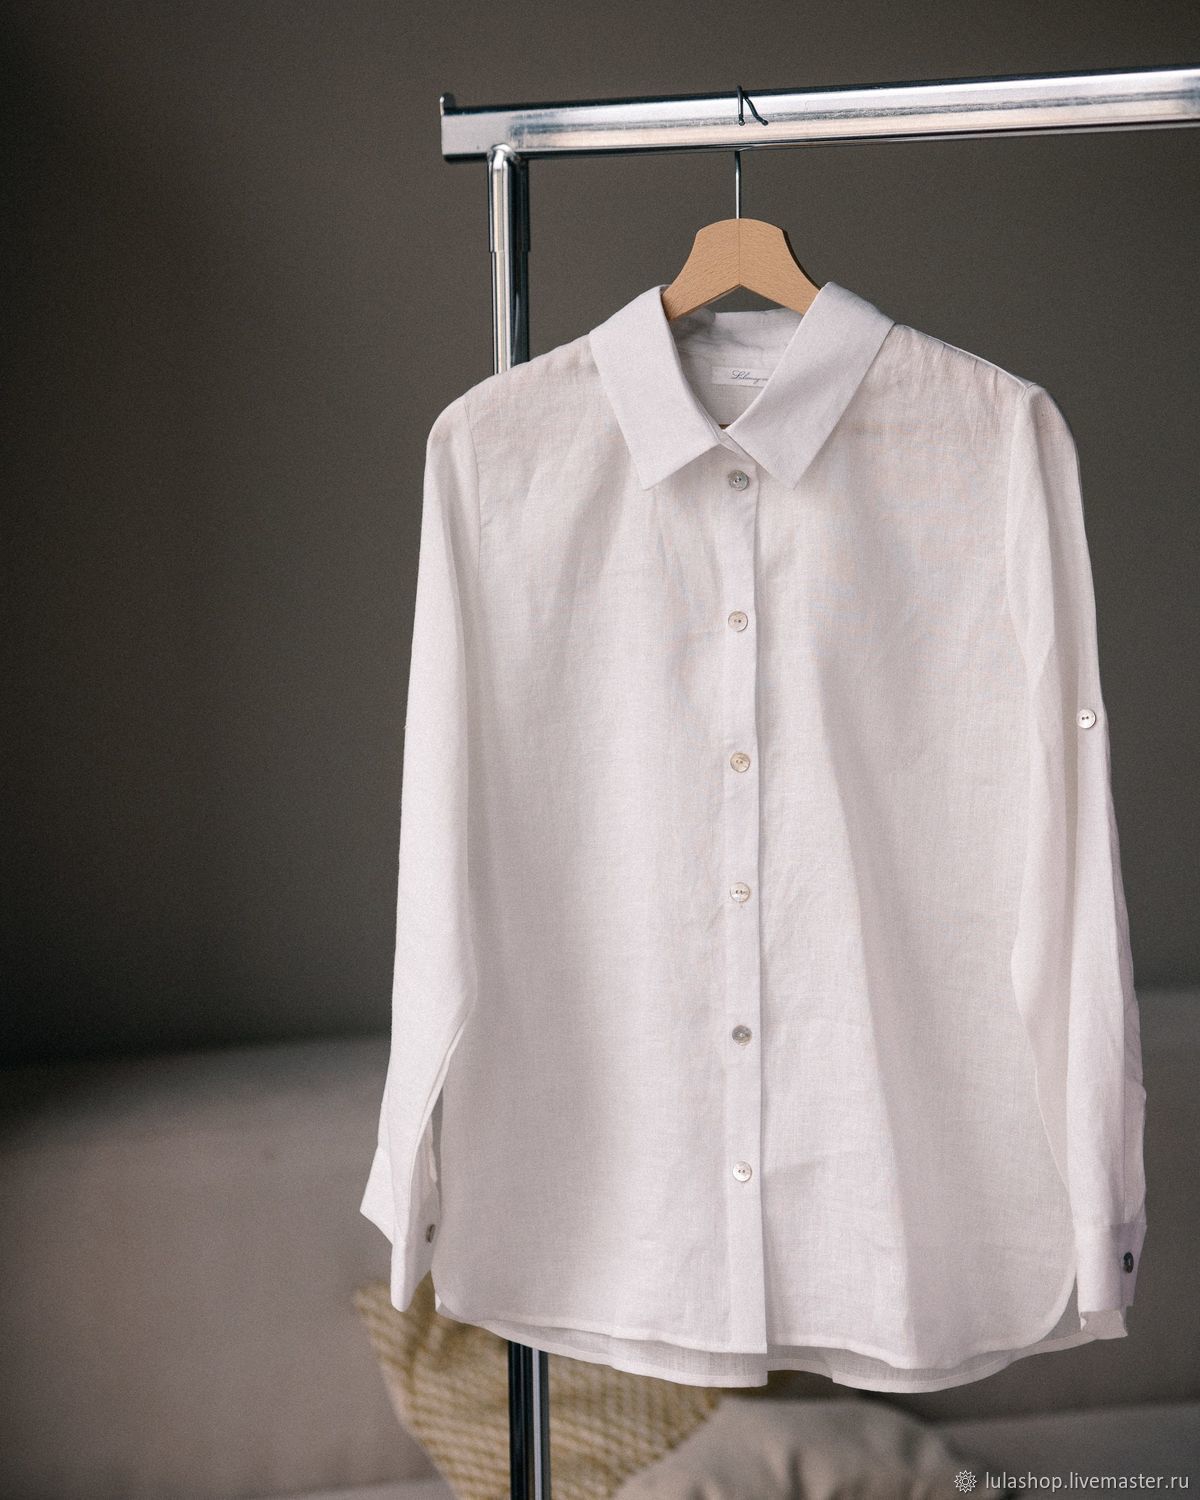 Women's shirt made of white linen, Shirts, Moscow,  Фото №1